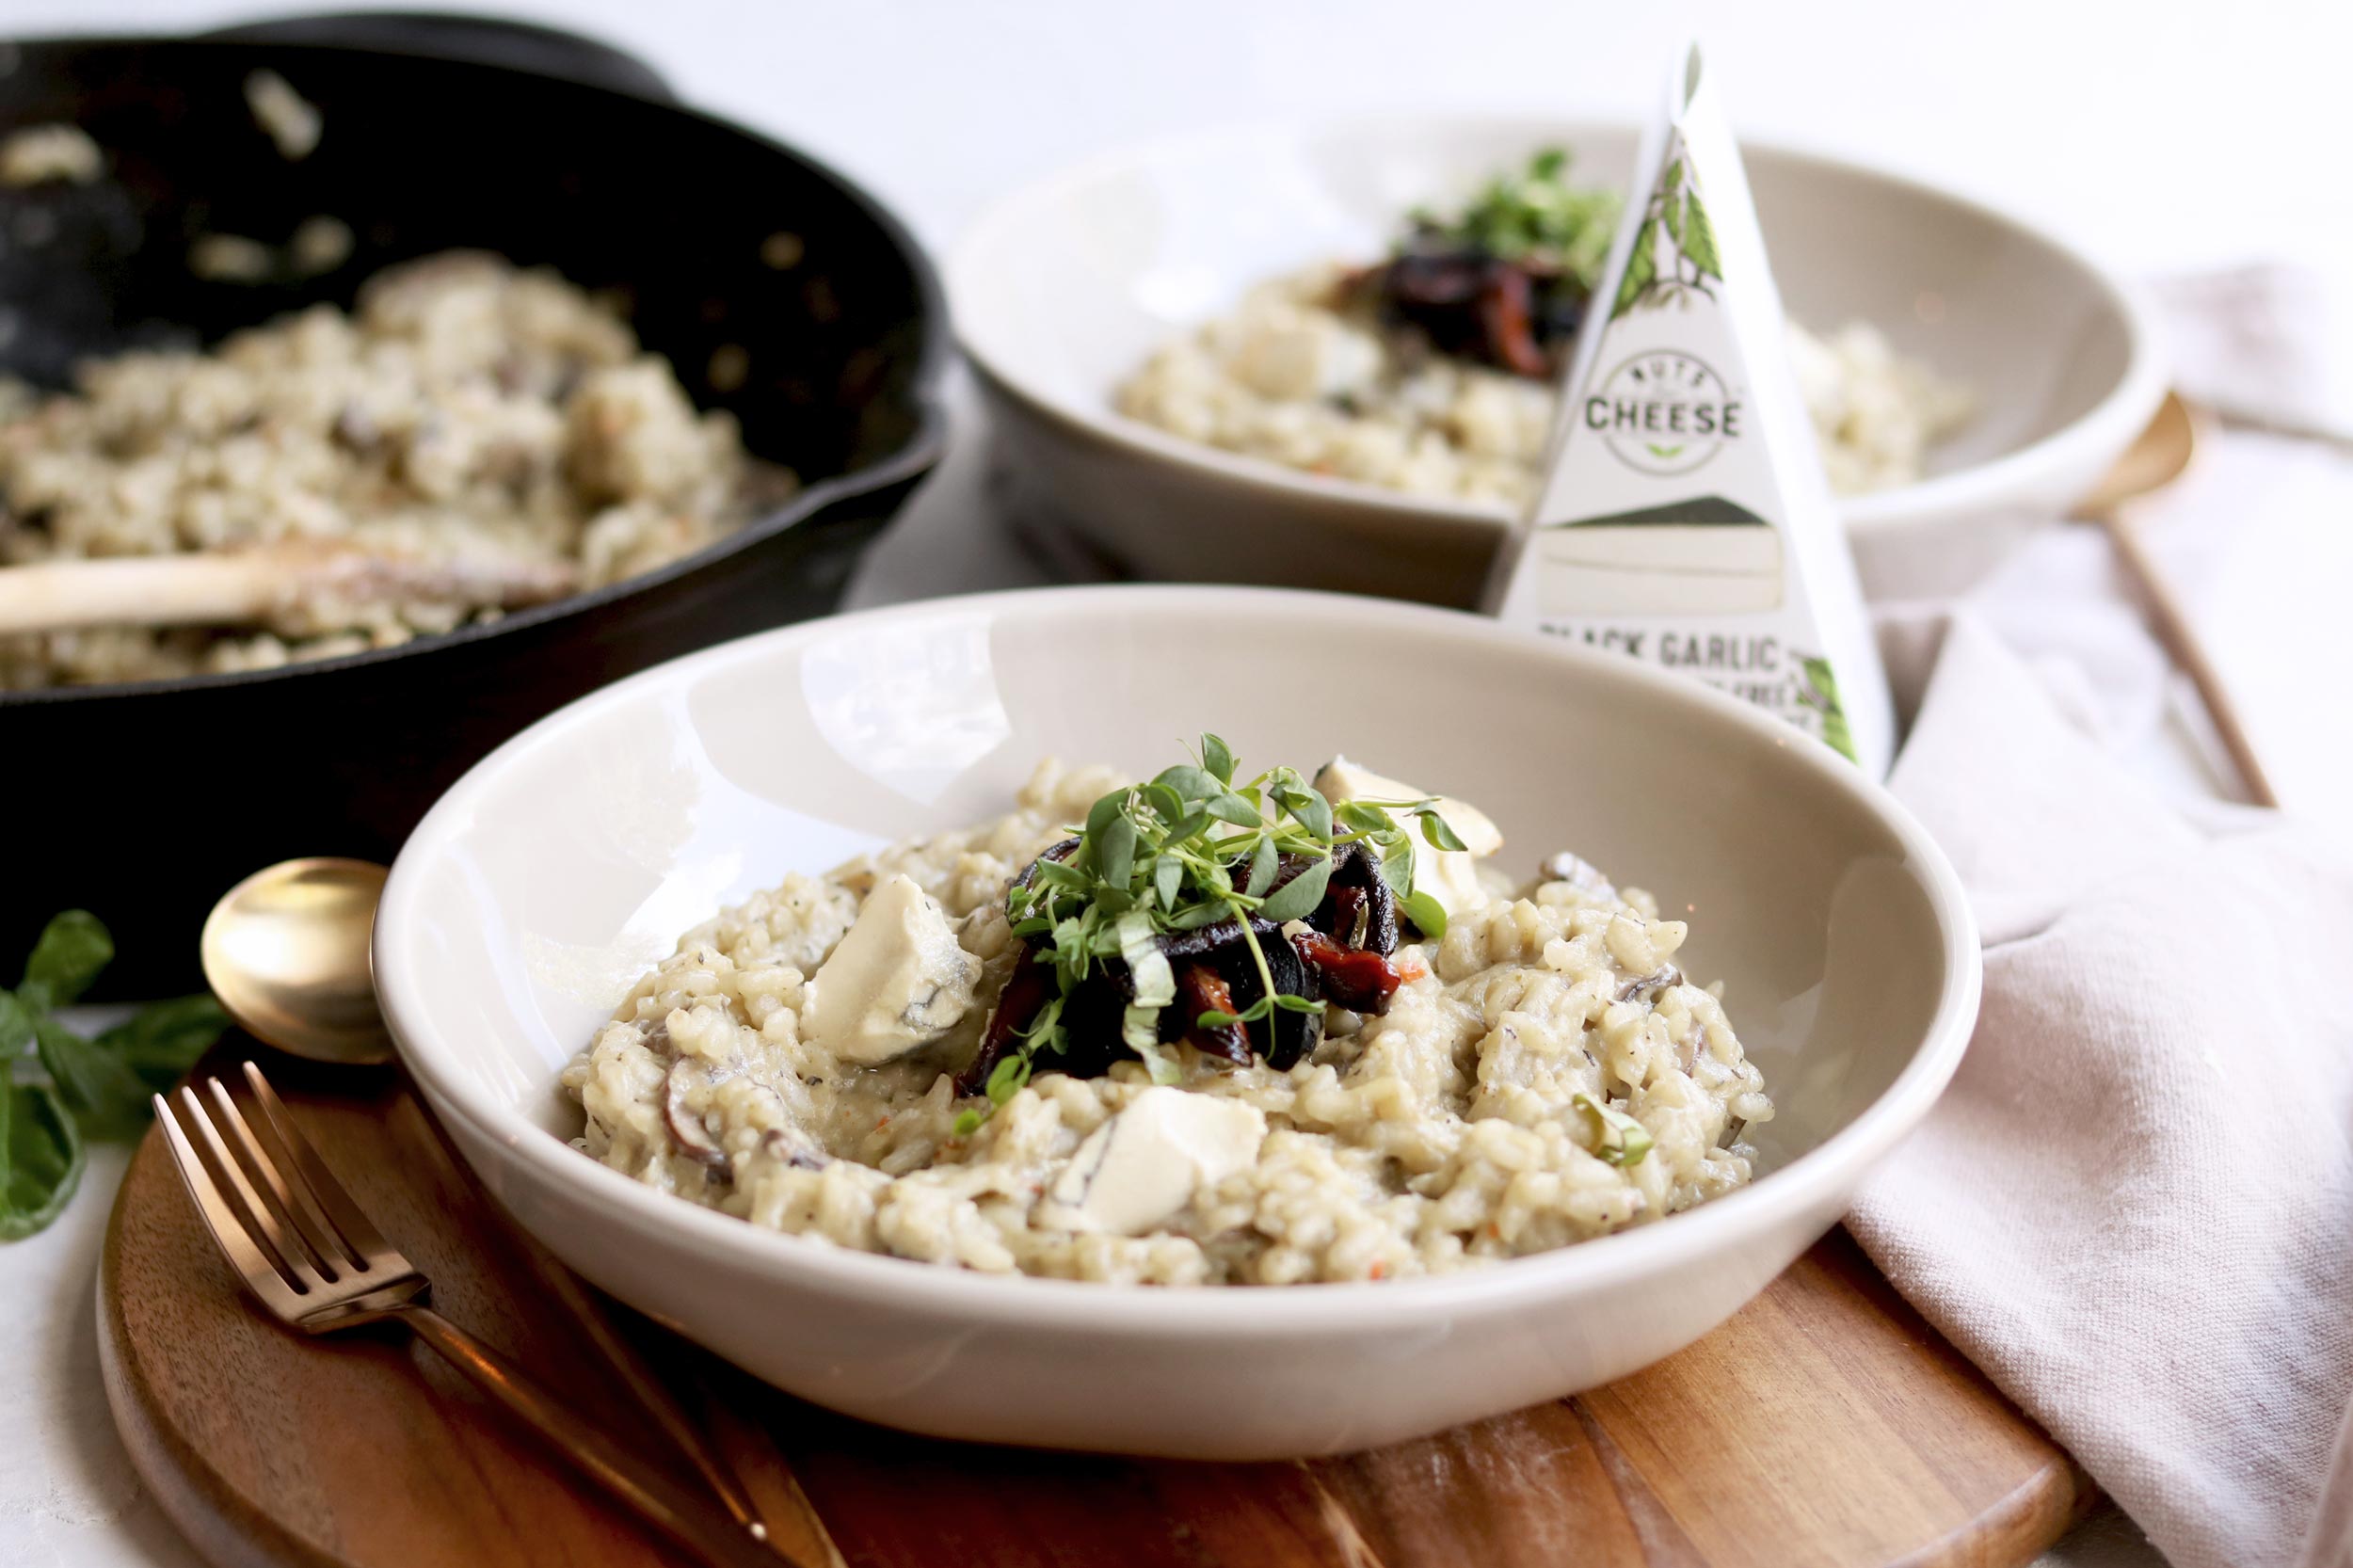 Two bowls of vegan mushroom risotto made with dairy-free black garlic cheese and topped with sauteed mushrooms. Served next to a pan with more risotto and a wedge of dairy-free black garlic cheese.